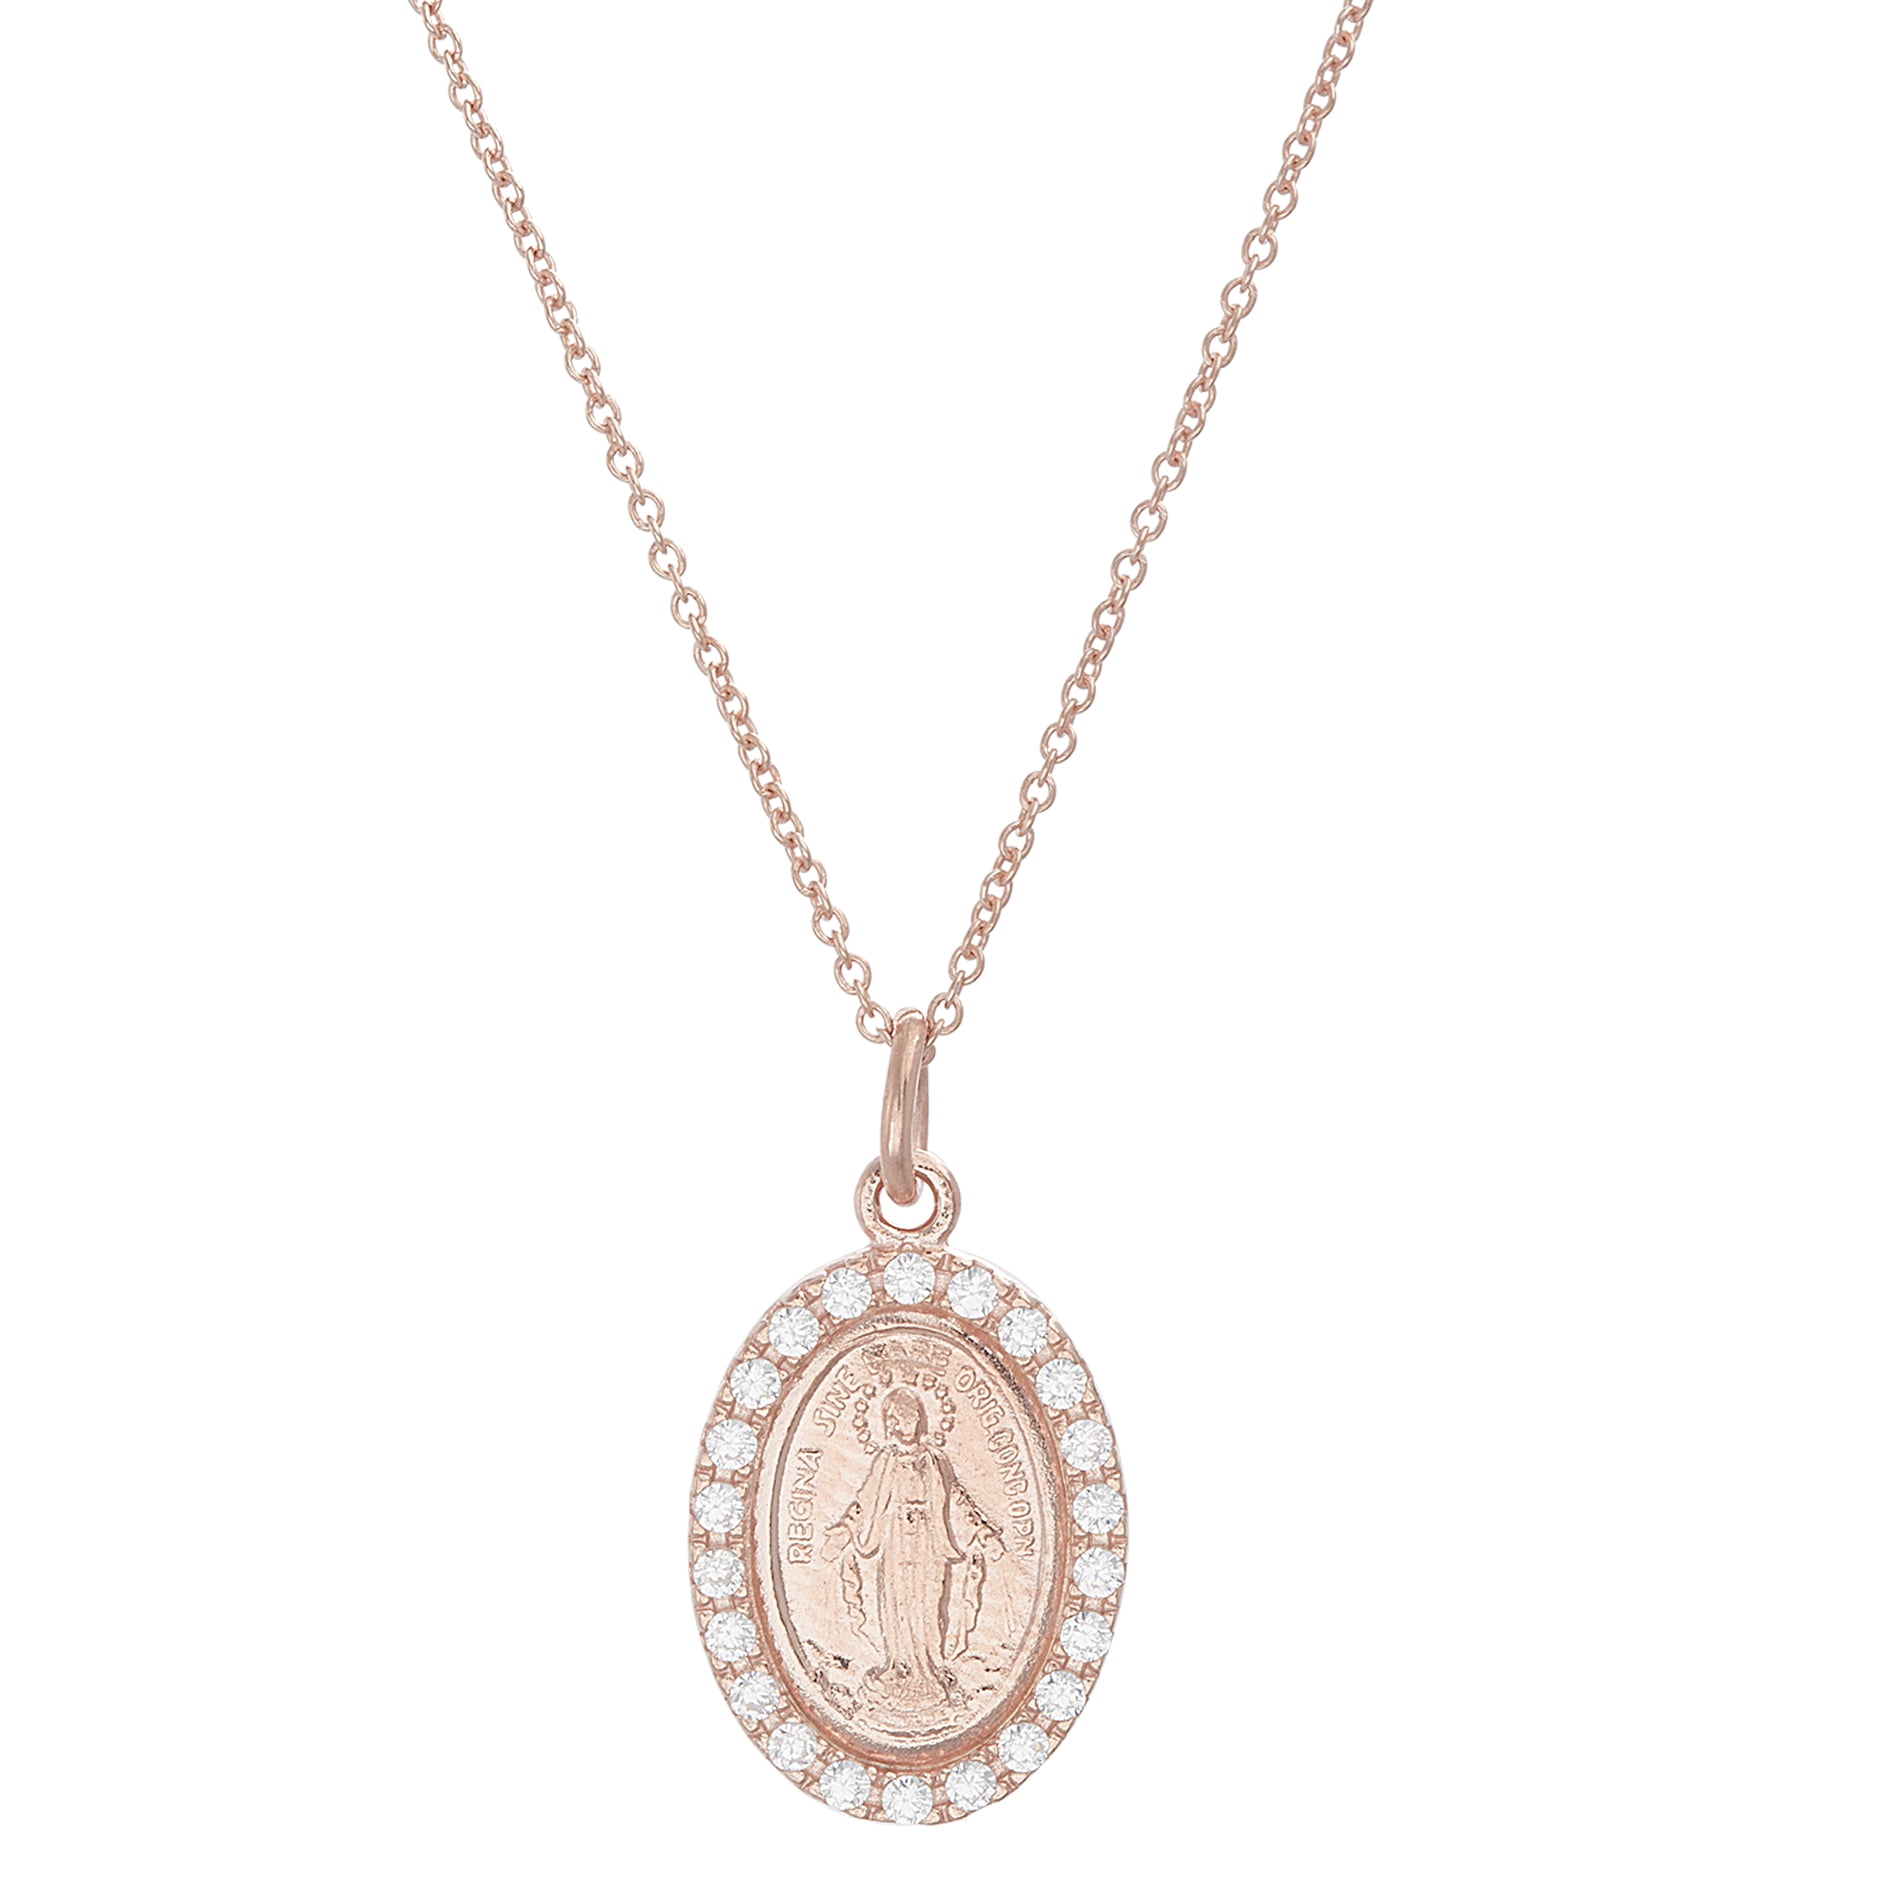 18-Inch Hamilton Gold Plated Necklace with 4mm Light Rose Birthstone Beads and Gold Filled Our Lady of Peace Charm. 